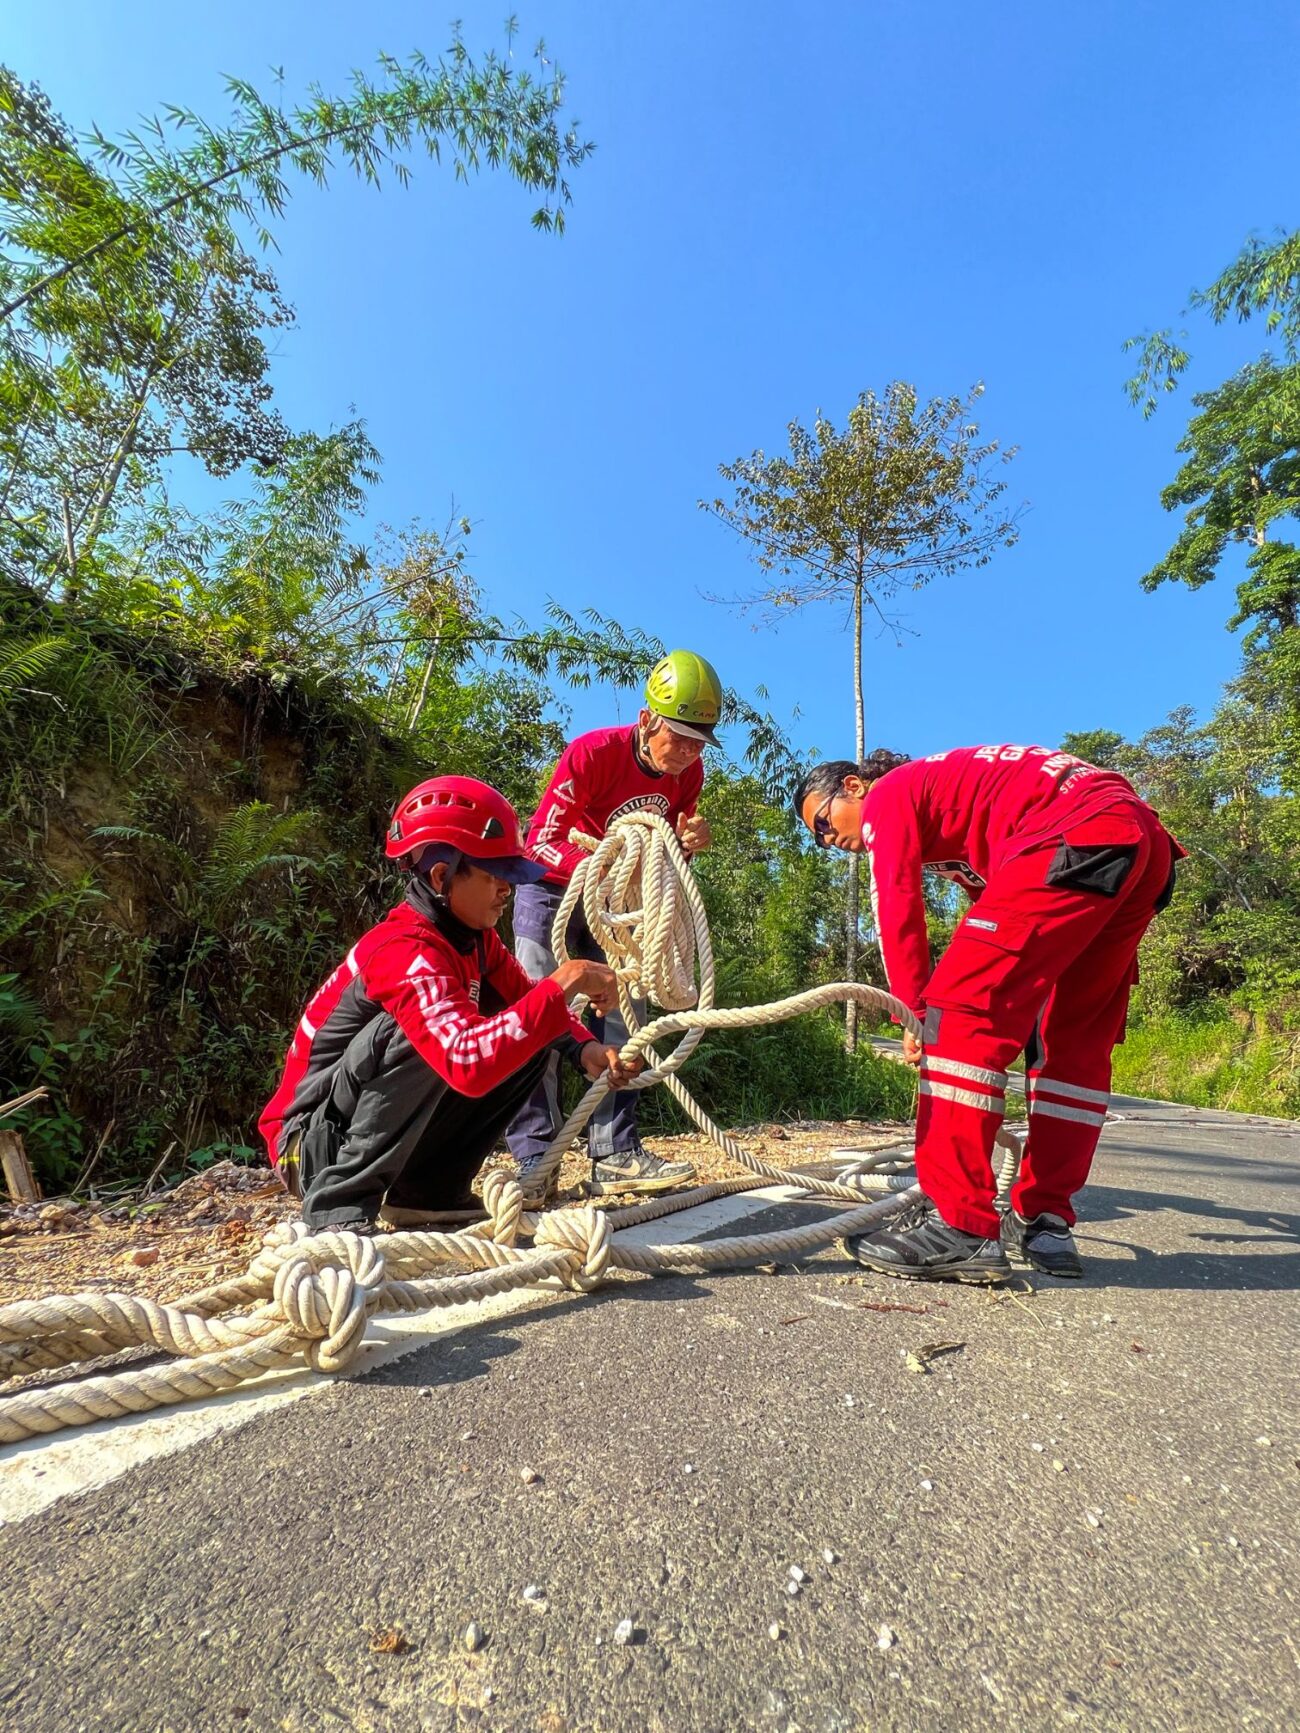 Members of Vertical Rescue Indonesia prepare ropes on the roadside